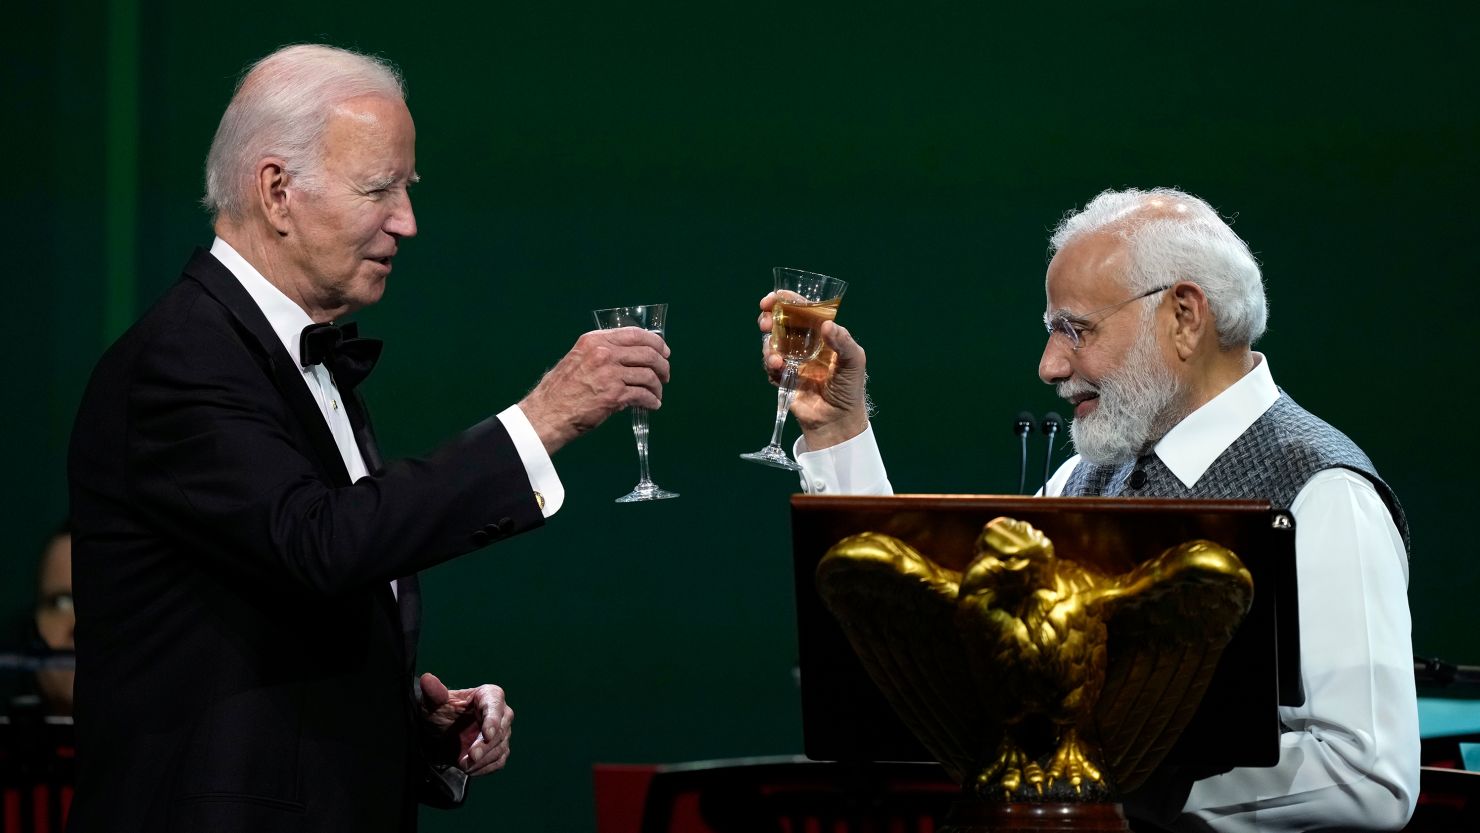 India's Prime Minister Narendra Modi offers a toast during a State Dinner with President Joe Biden at the White House in Washington, Thursday, June 22, 2023.